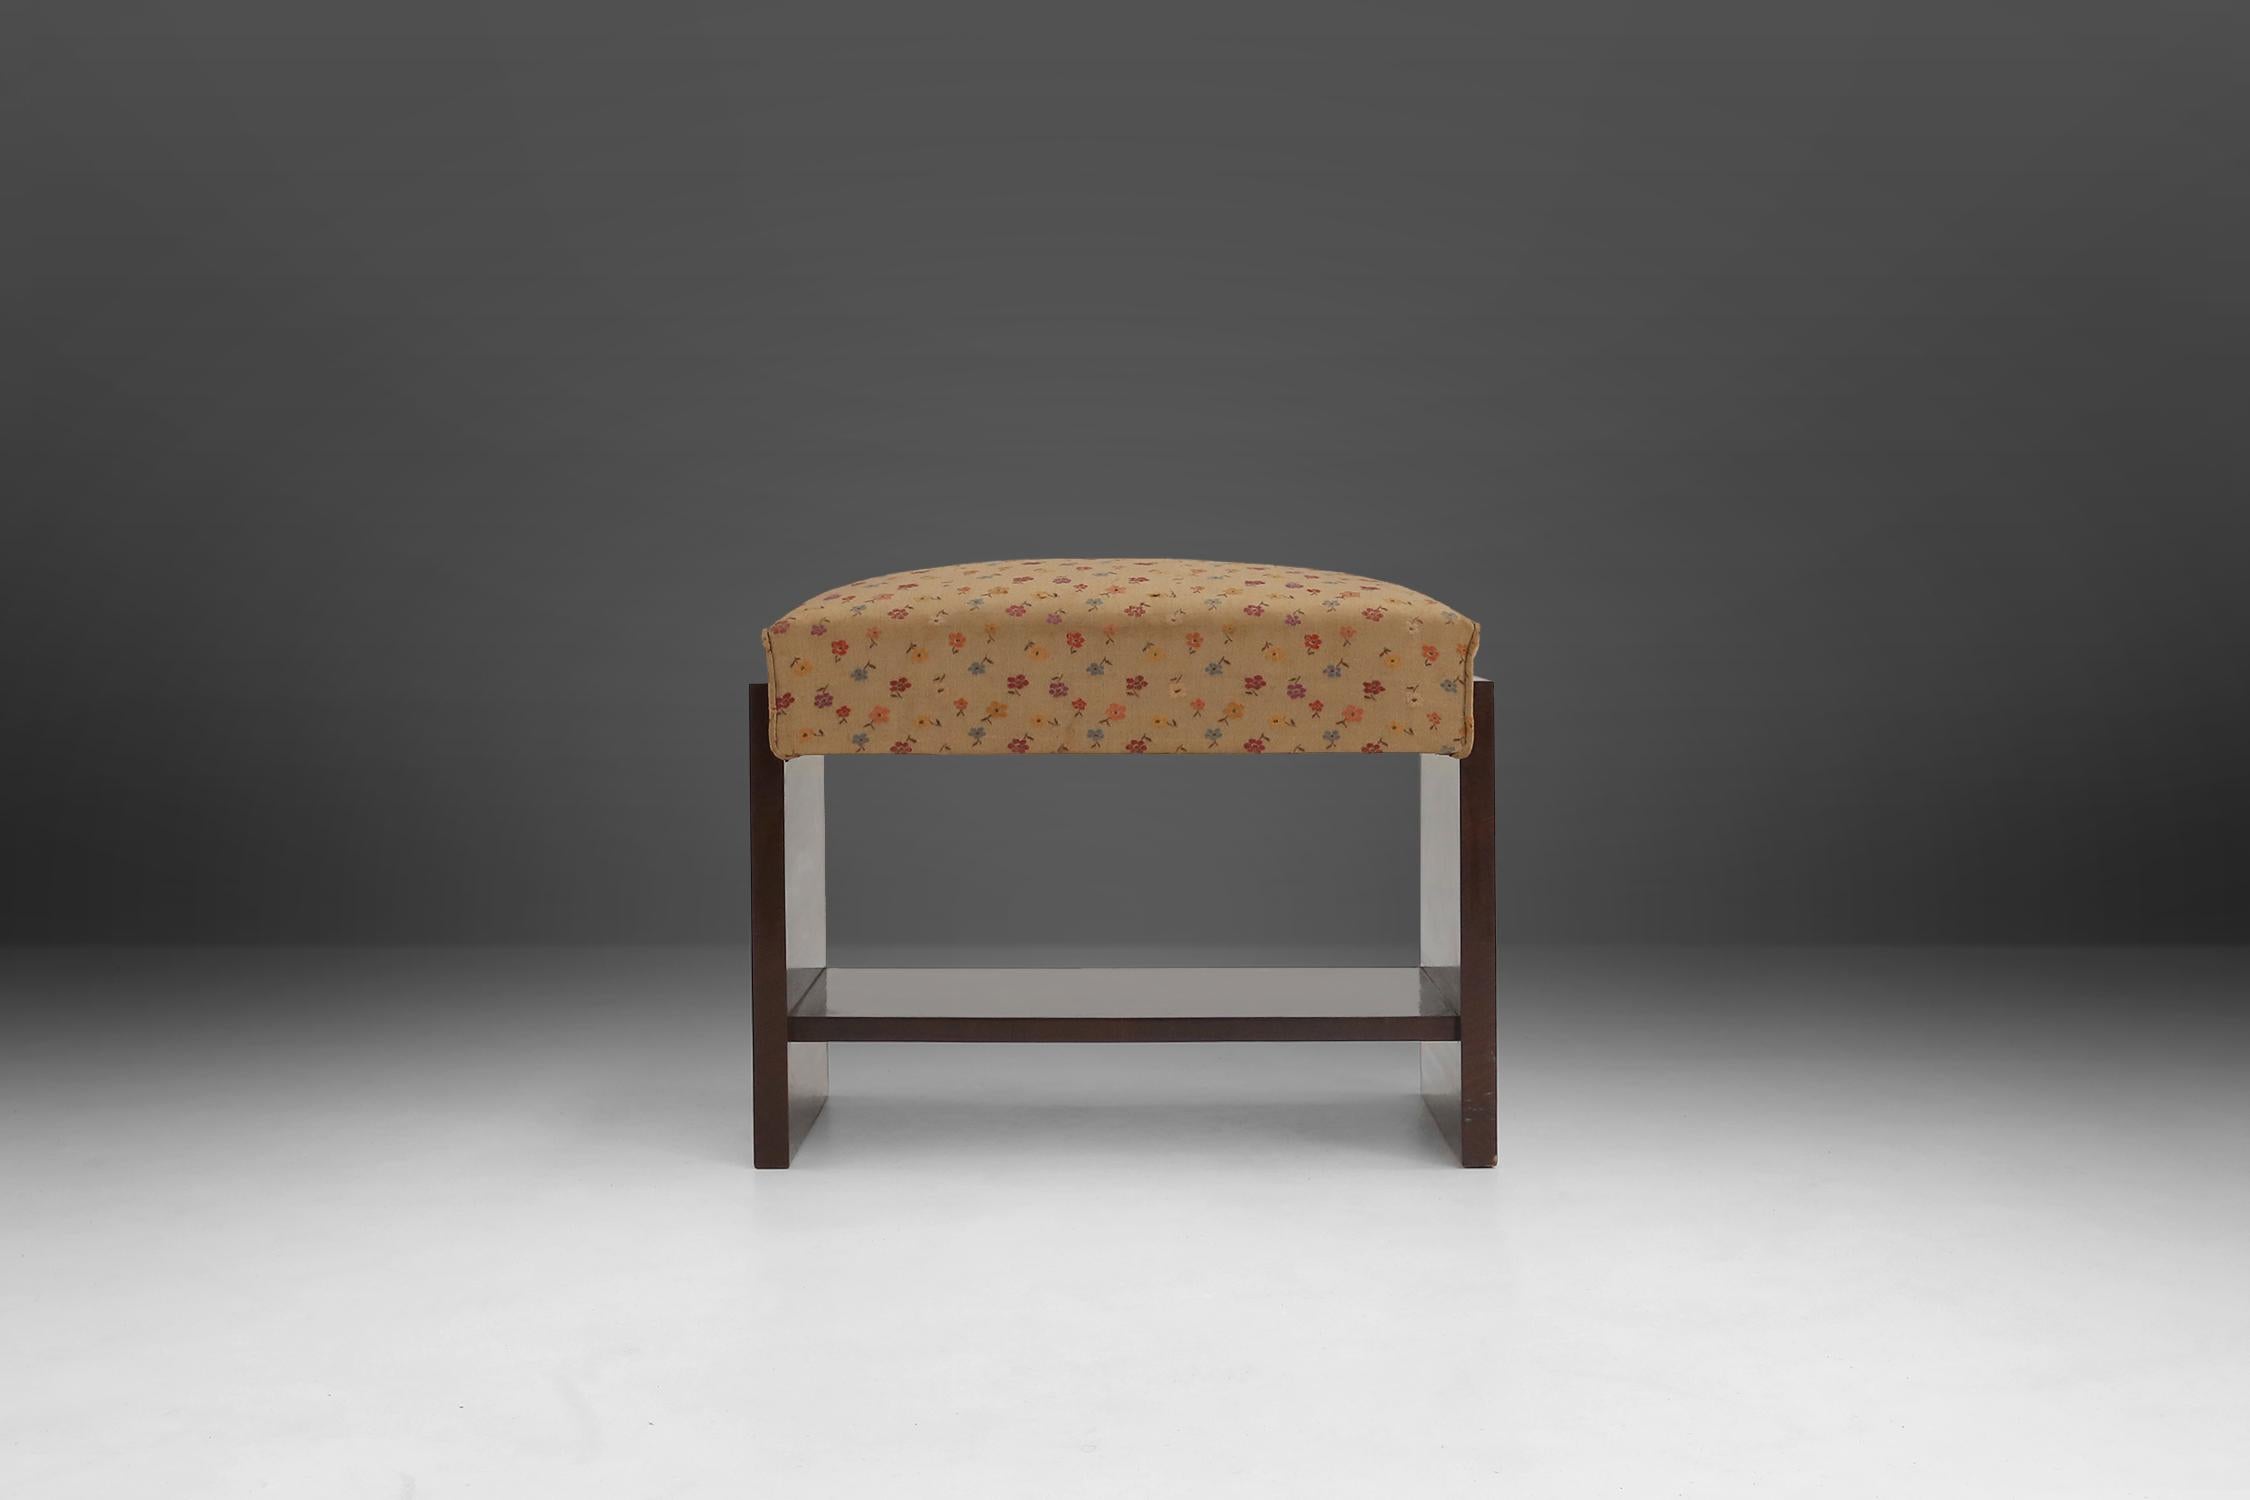 Art Deco stool made of a wooden base and fabric seating with flower pattern.